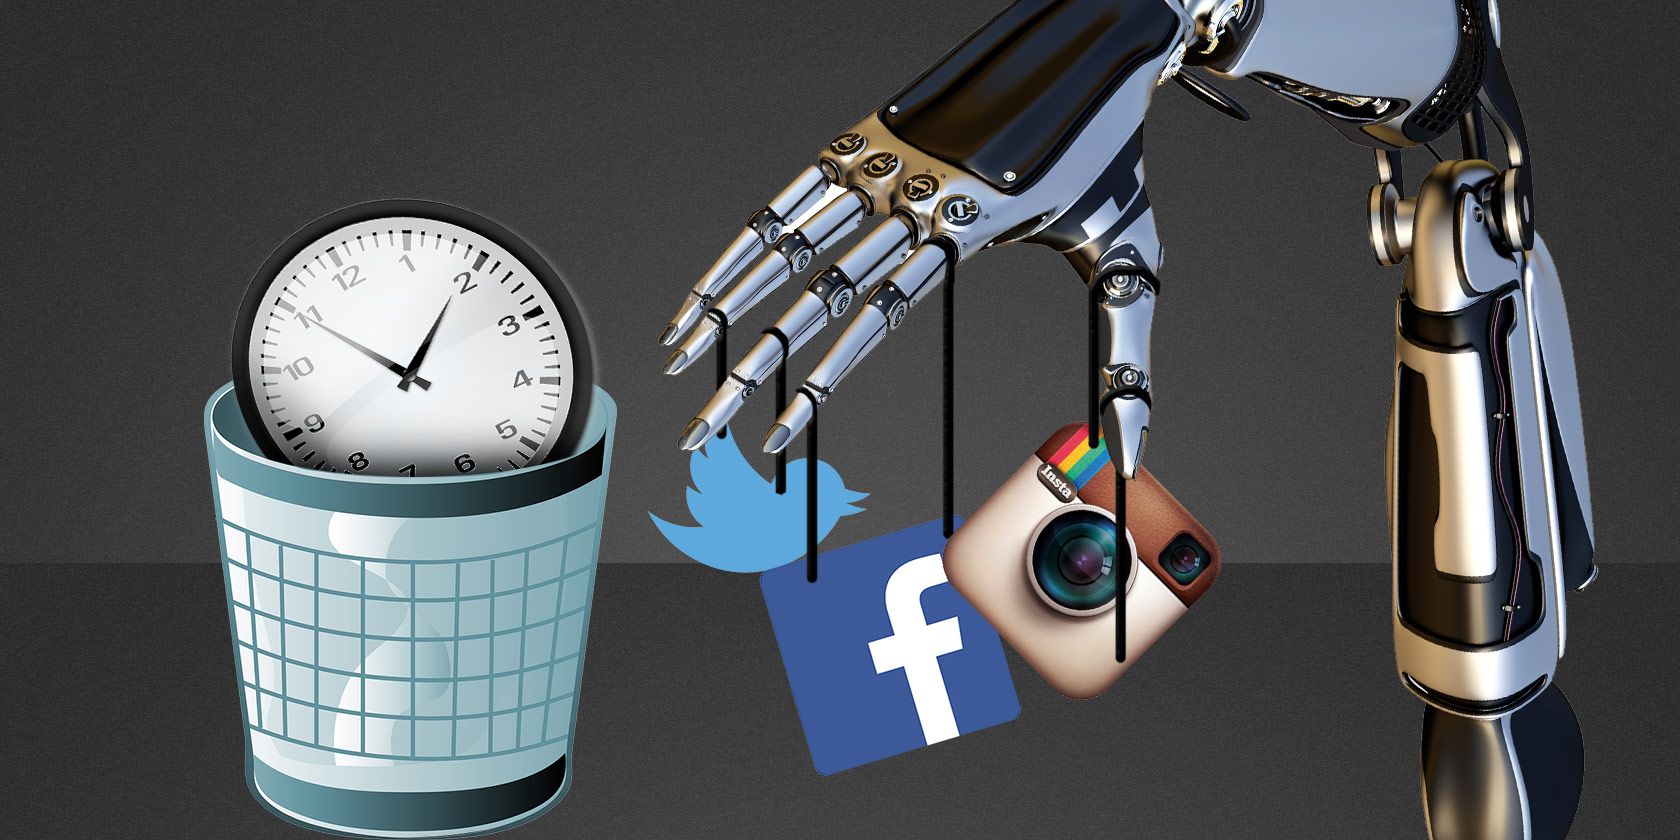 How to Disable Algorithmic Feeds on Twitter, Instagram, and Facebook